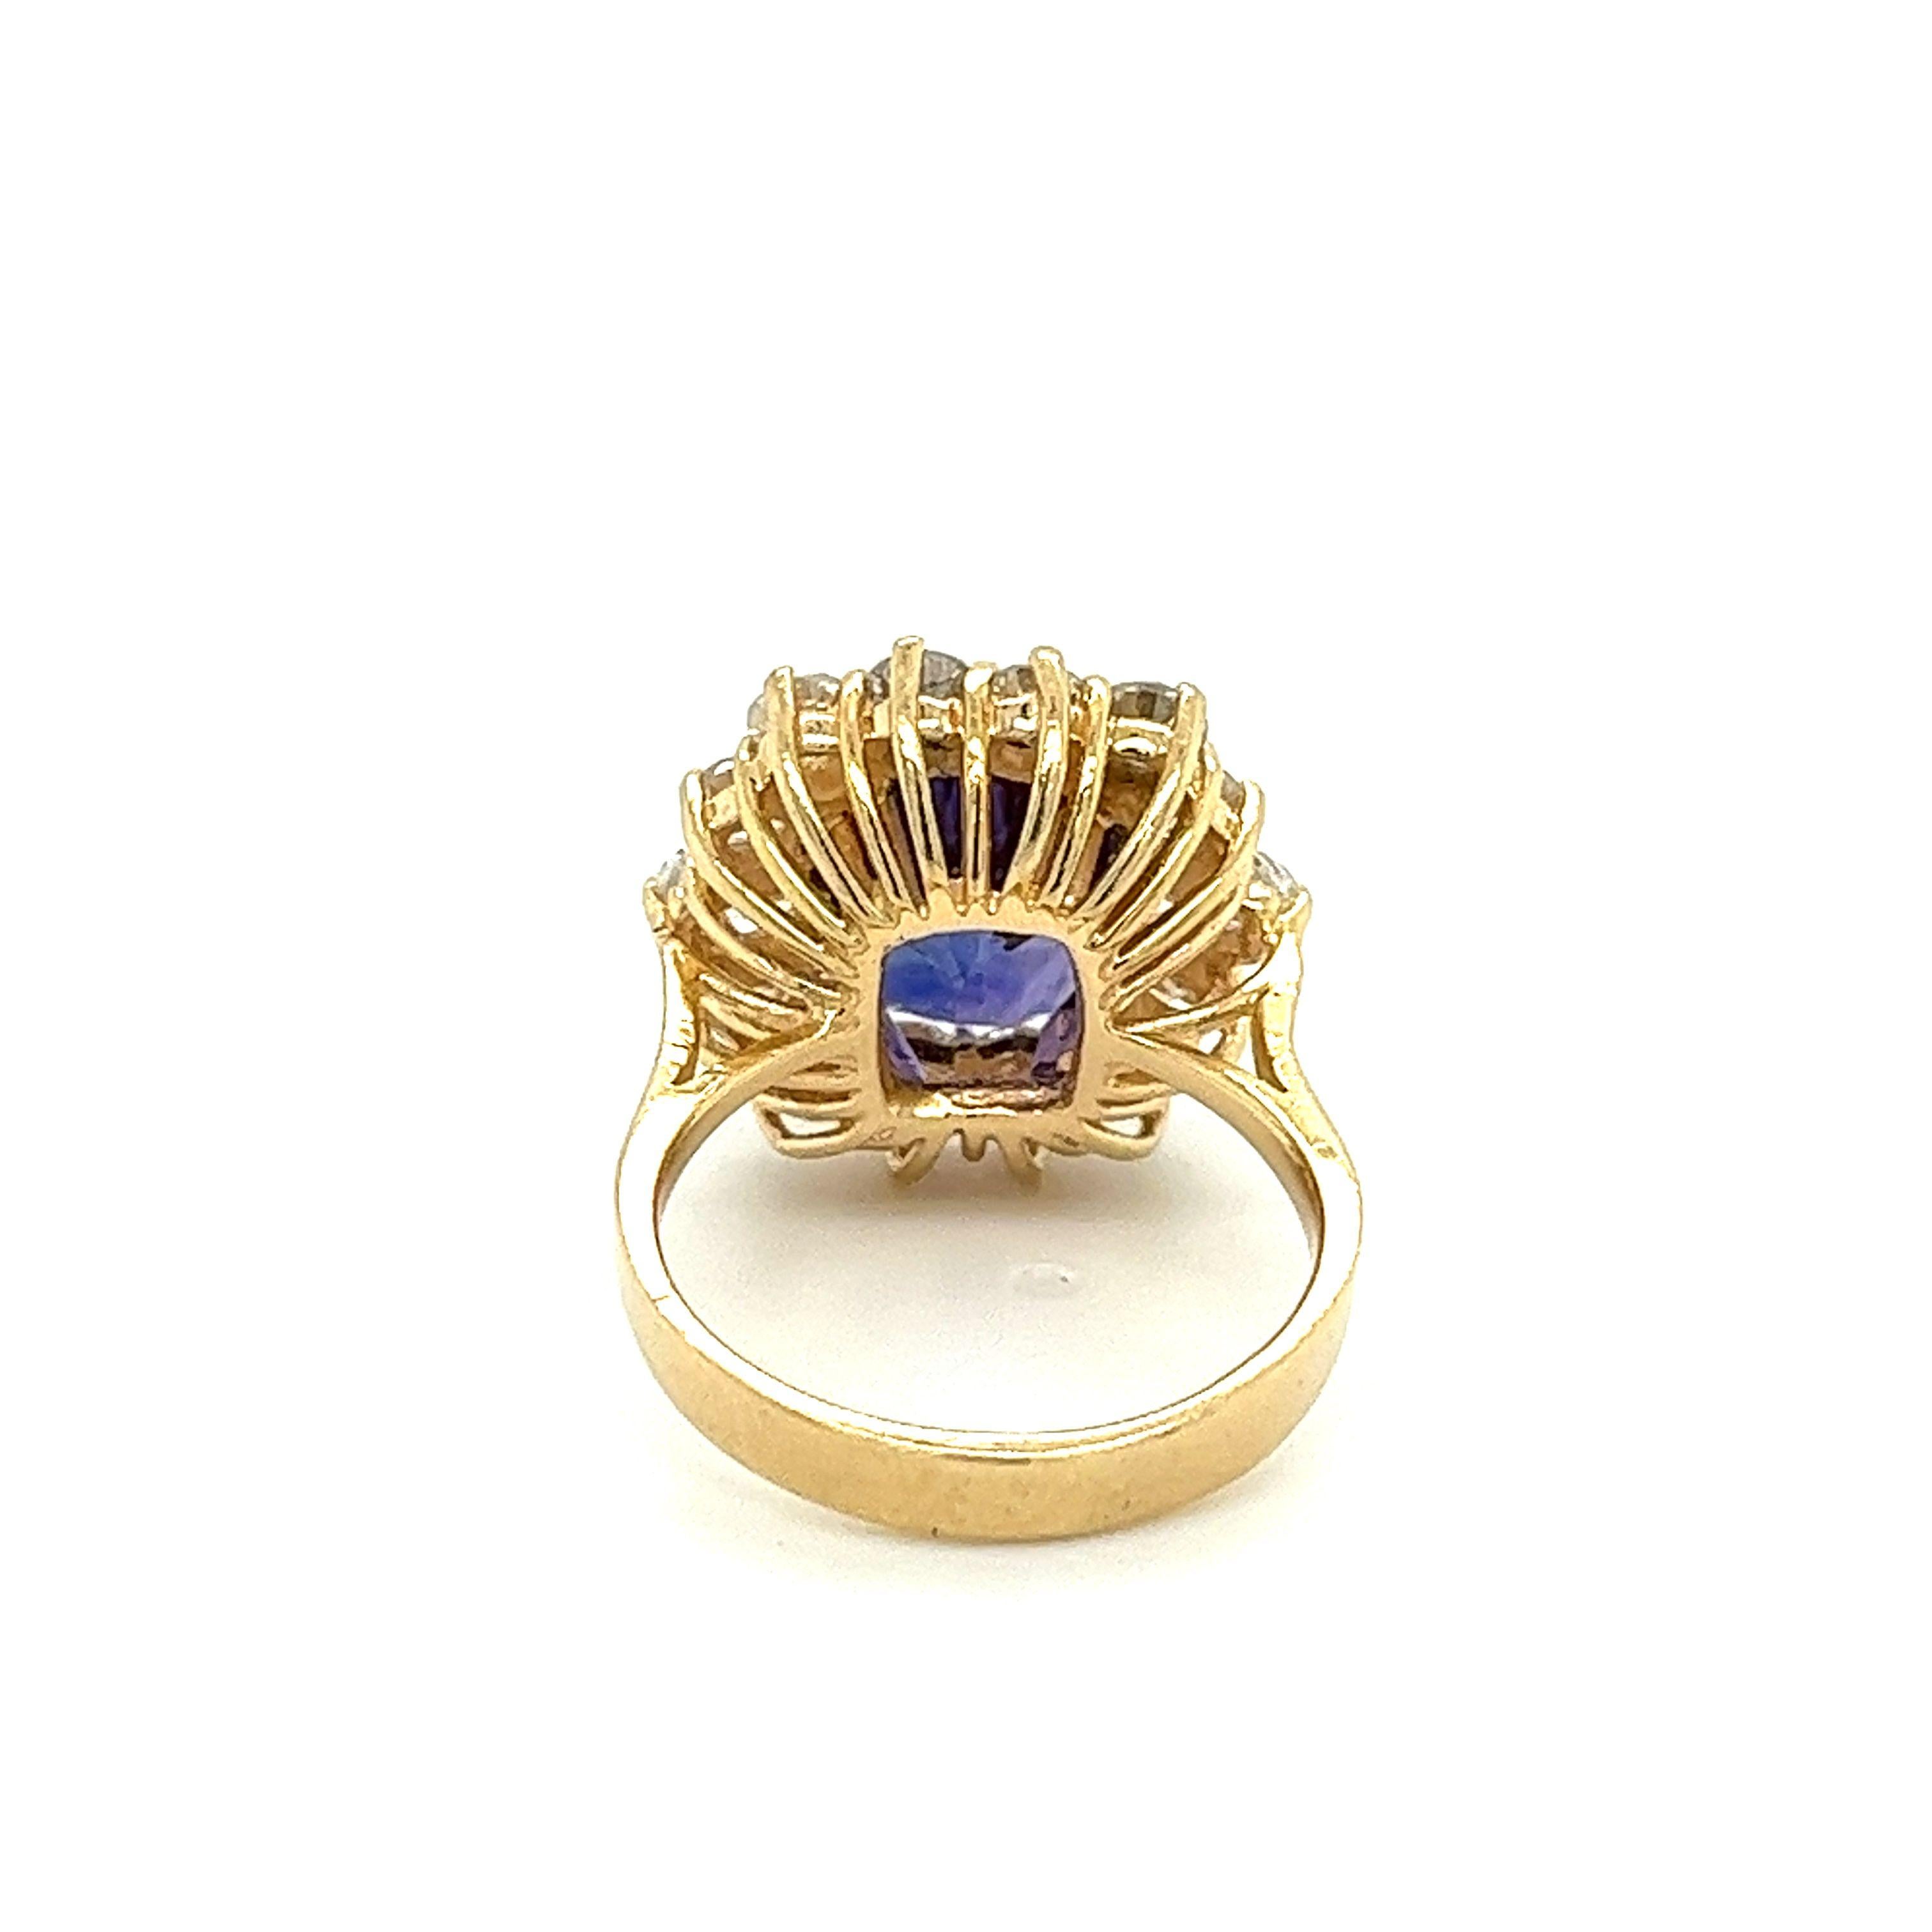 Modernist 7.2 Carat Oval Cut Blue Sapphire & Diamond Halo Ring in 14K Yellow Gold For Sale